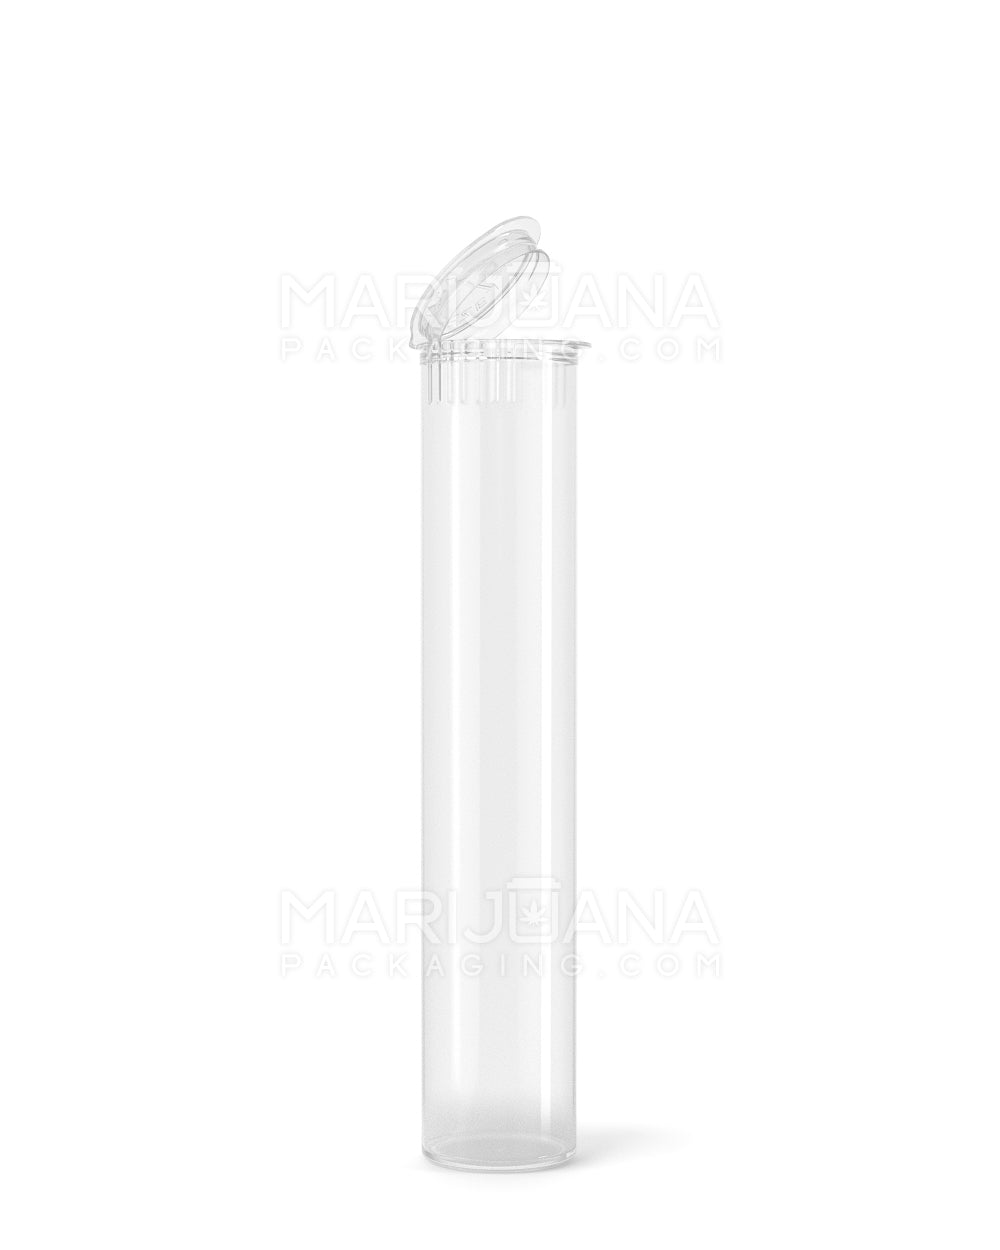 Child Resistant | Pop Top Plastic Pre-Roll Tubes | 98mm - Clear - 1000 Count - 1